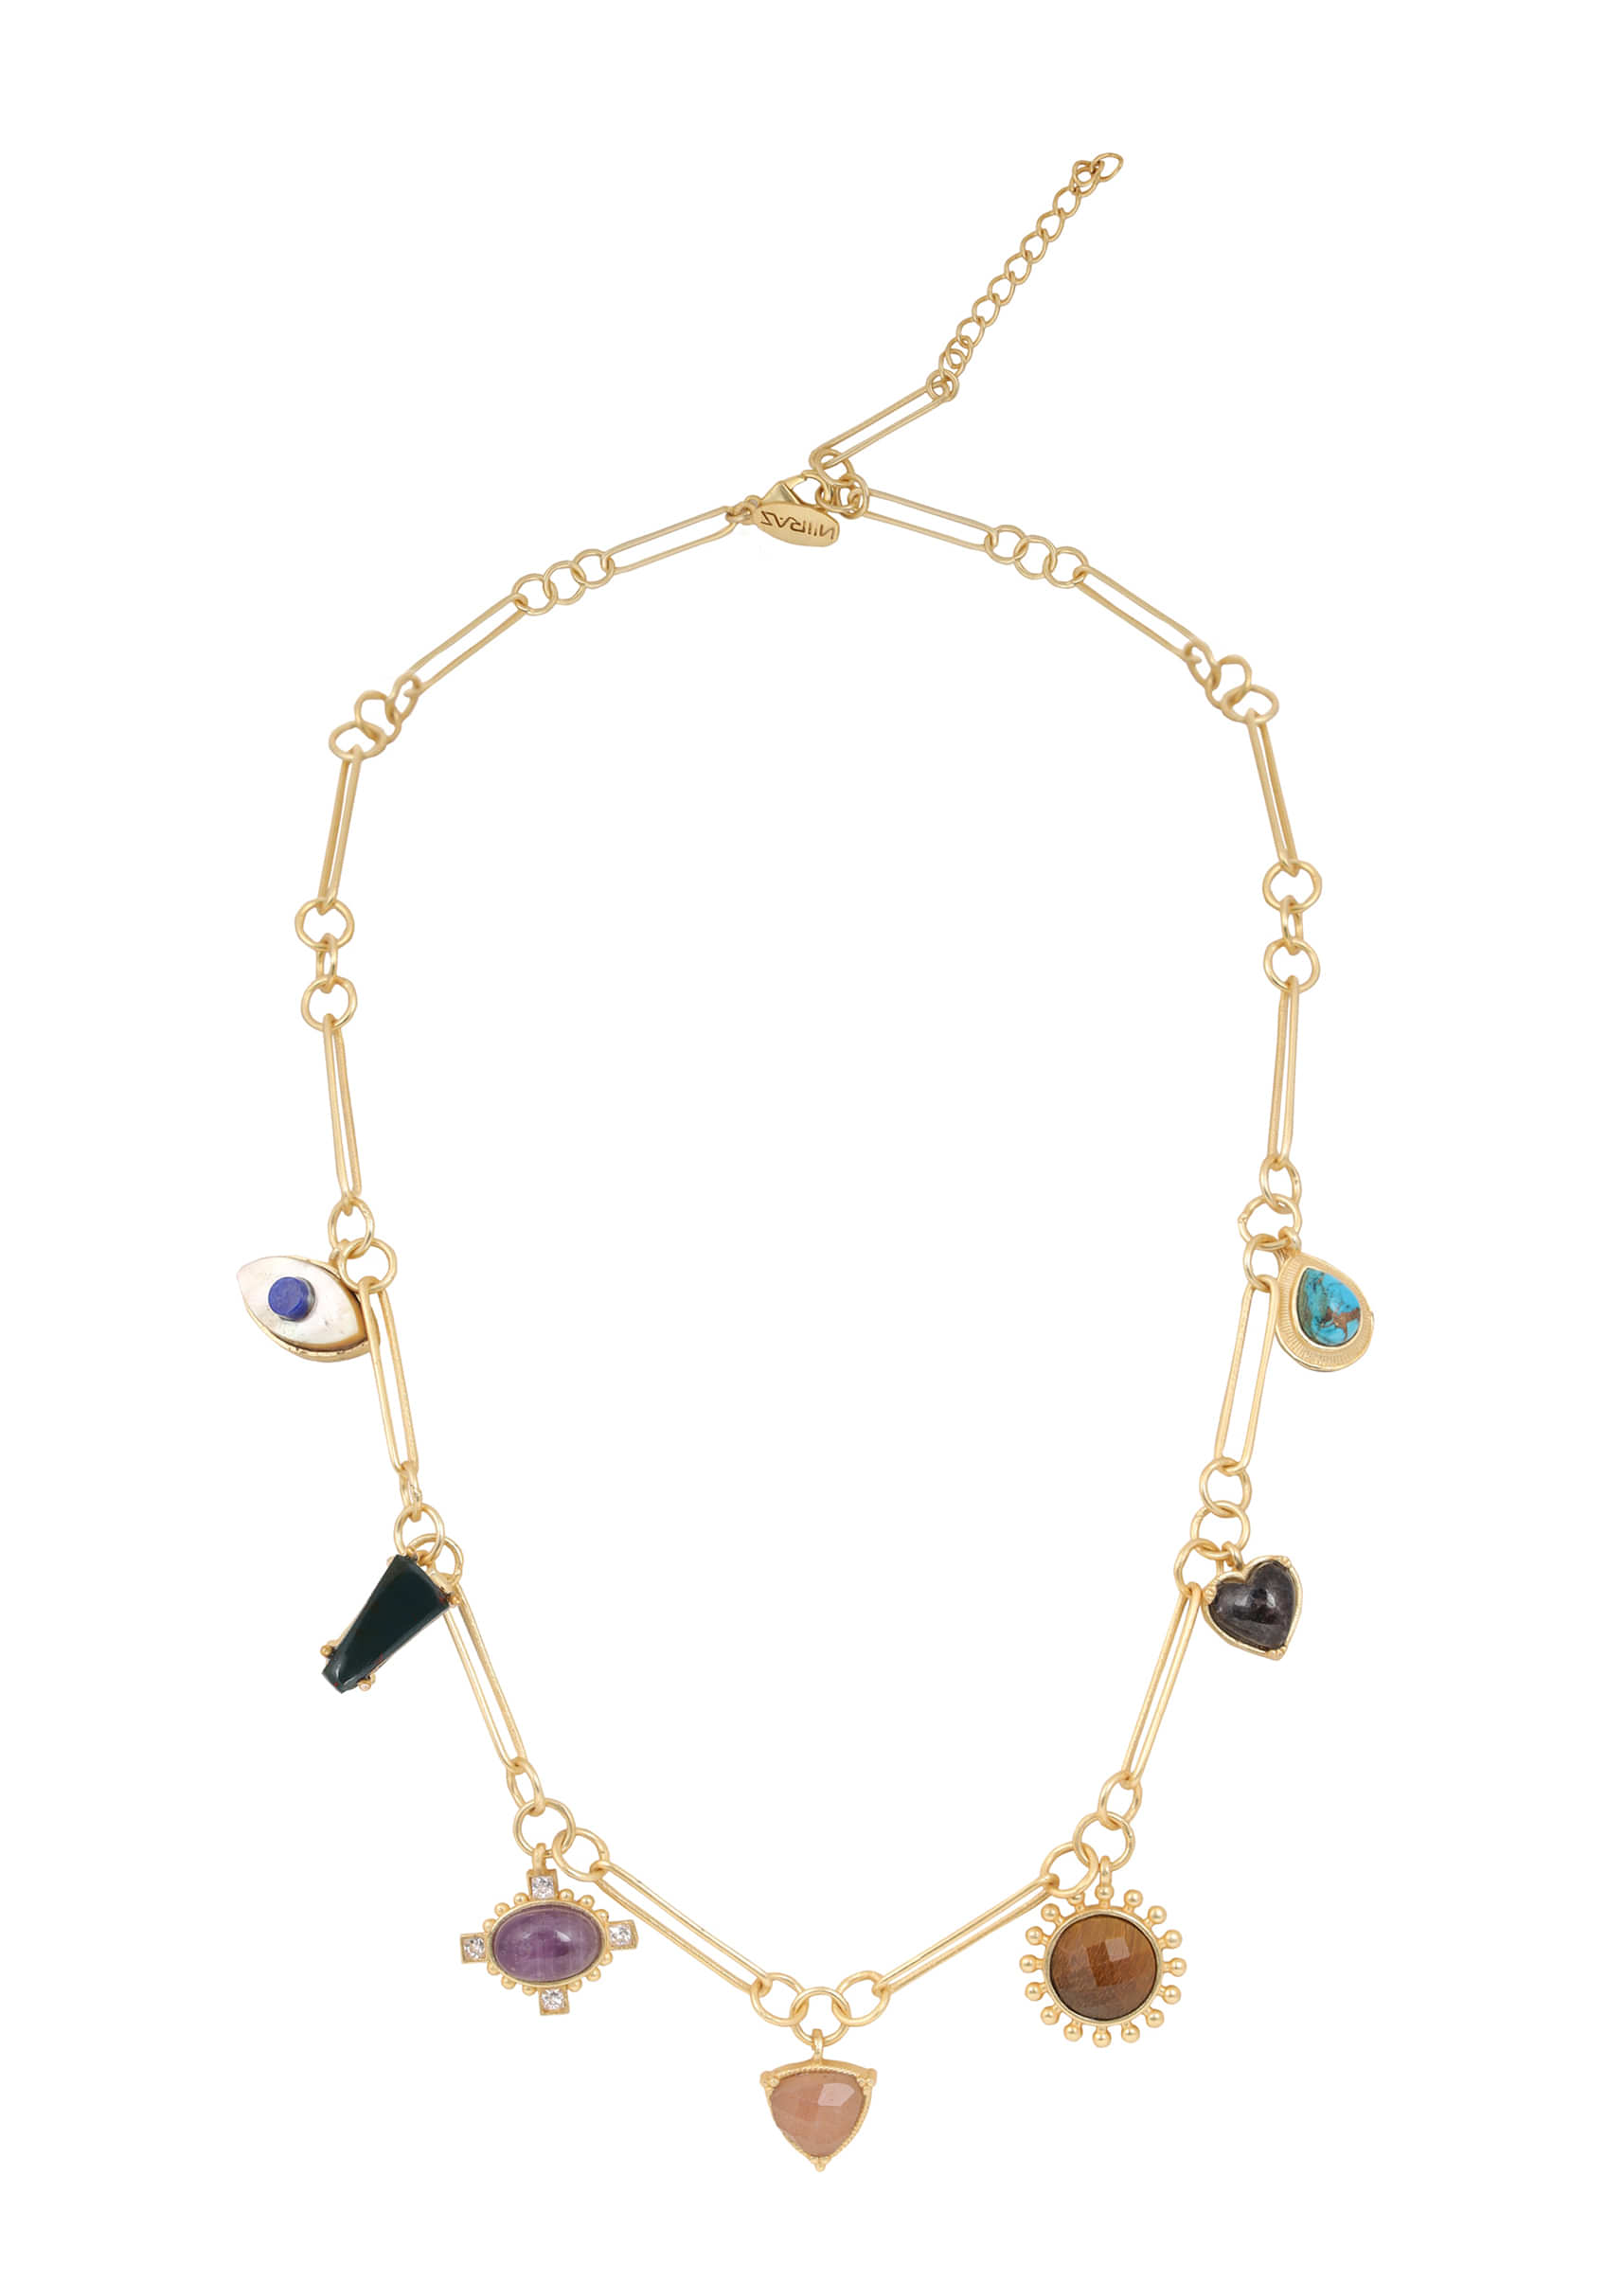 22Kt Gold Plated Necklace With Healing Stone Pendants In Round Fall